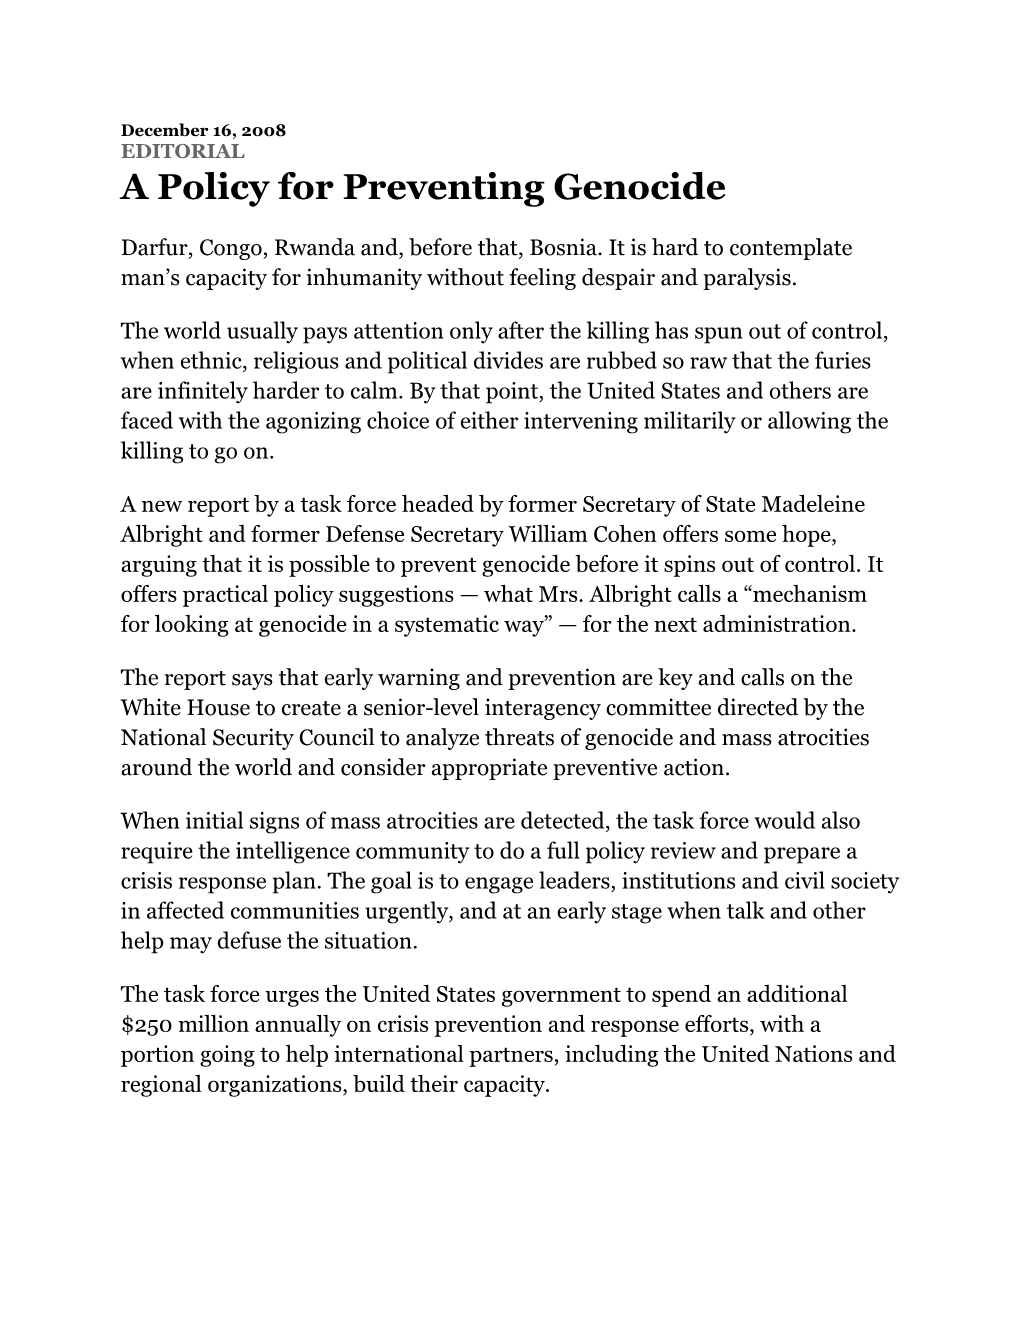 A Policy for Preventing Genocide